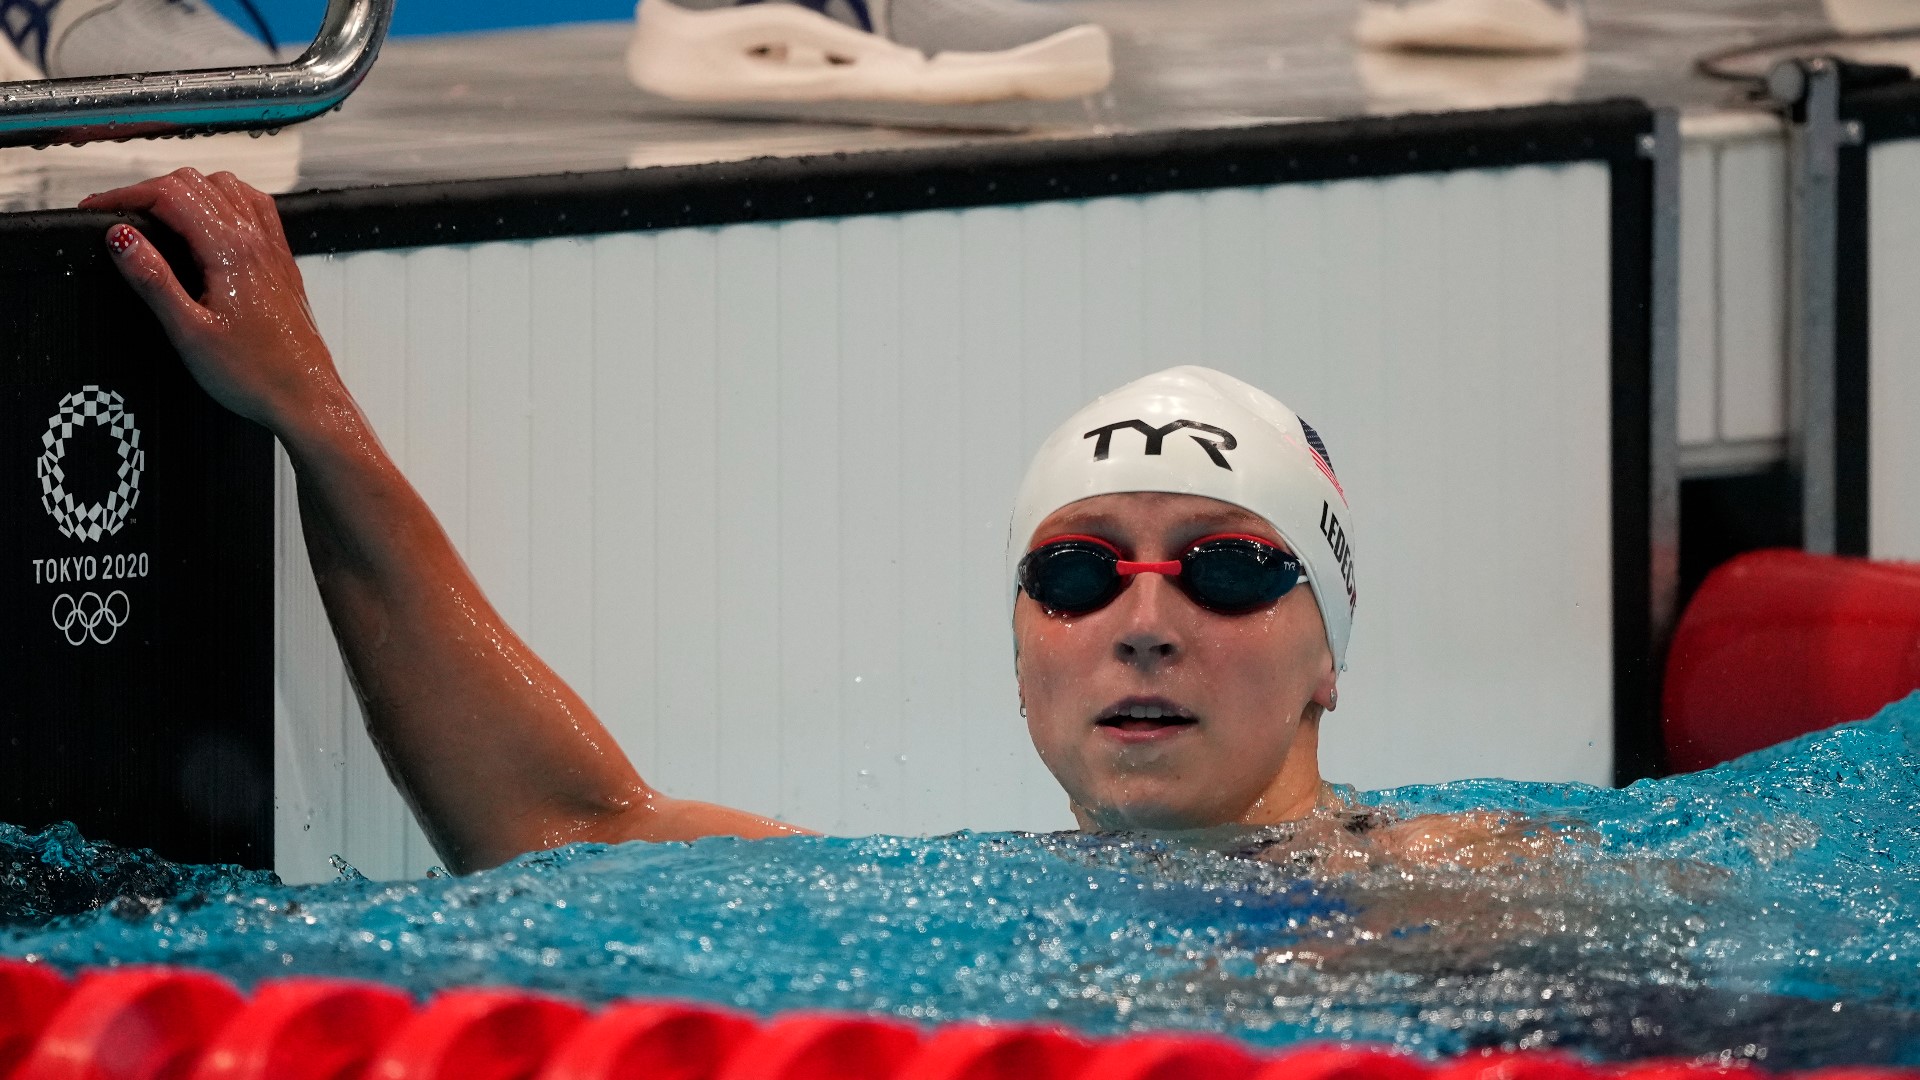 Katie Ledecky's teammates are already piling up Olympic medals. Now it's her turn, and she wants some hardware of her own, Associated Press reported.